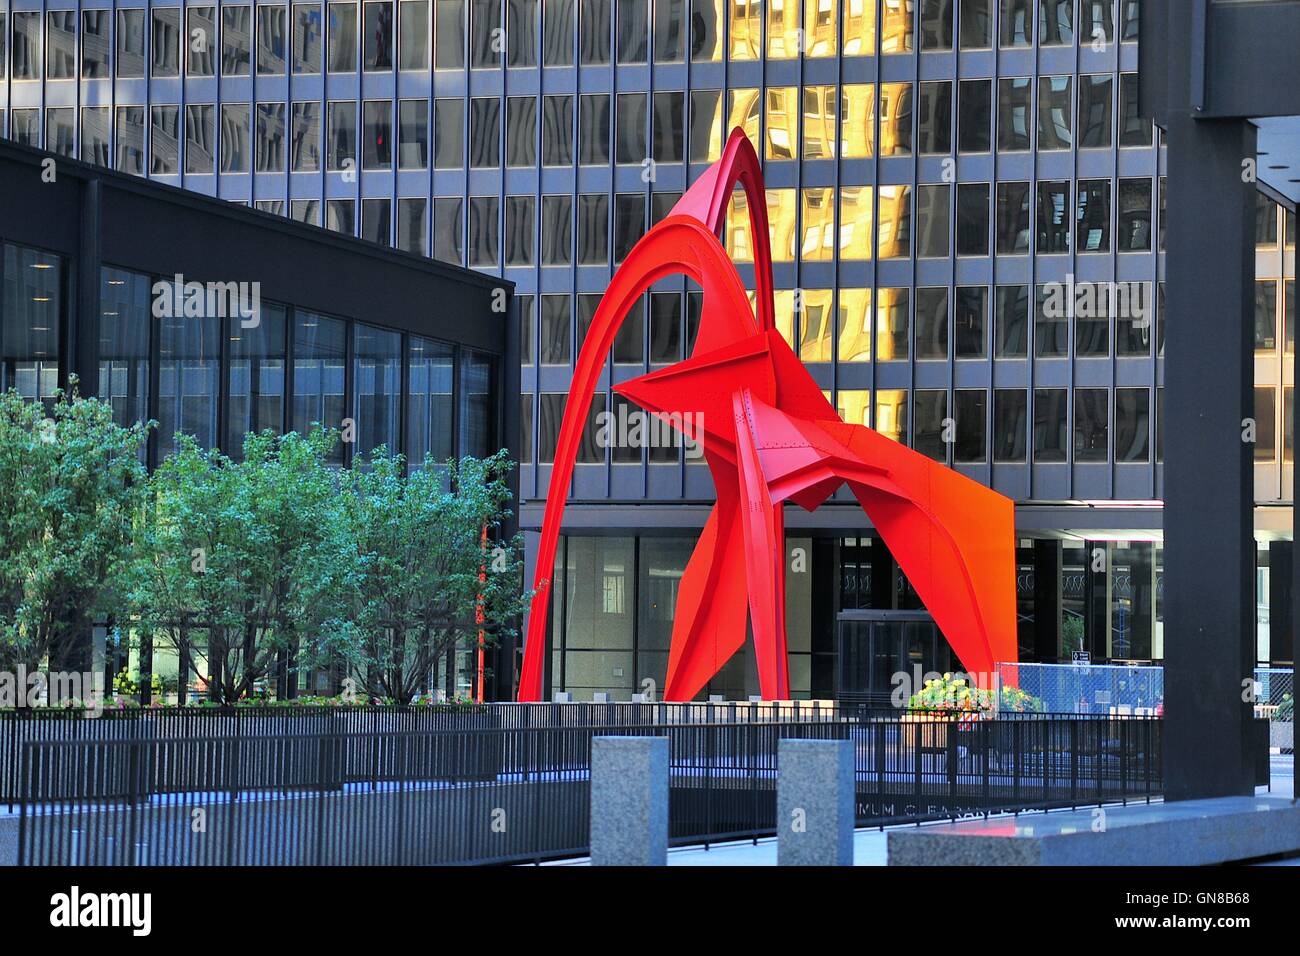 The 'Flamingo' sculpture by famed artist Alexander Calder, a 53-foot, 50-ton work of art located in the Chicago's Federal Plaza. Chicago, Illinois, US Stock Photo